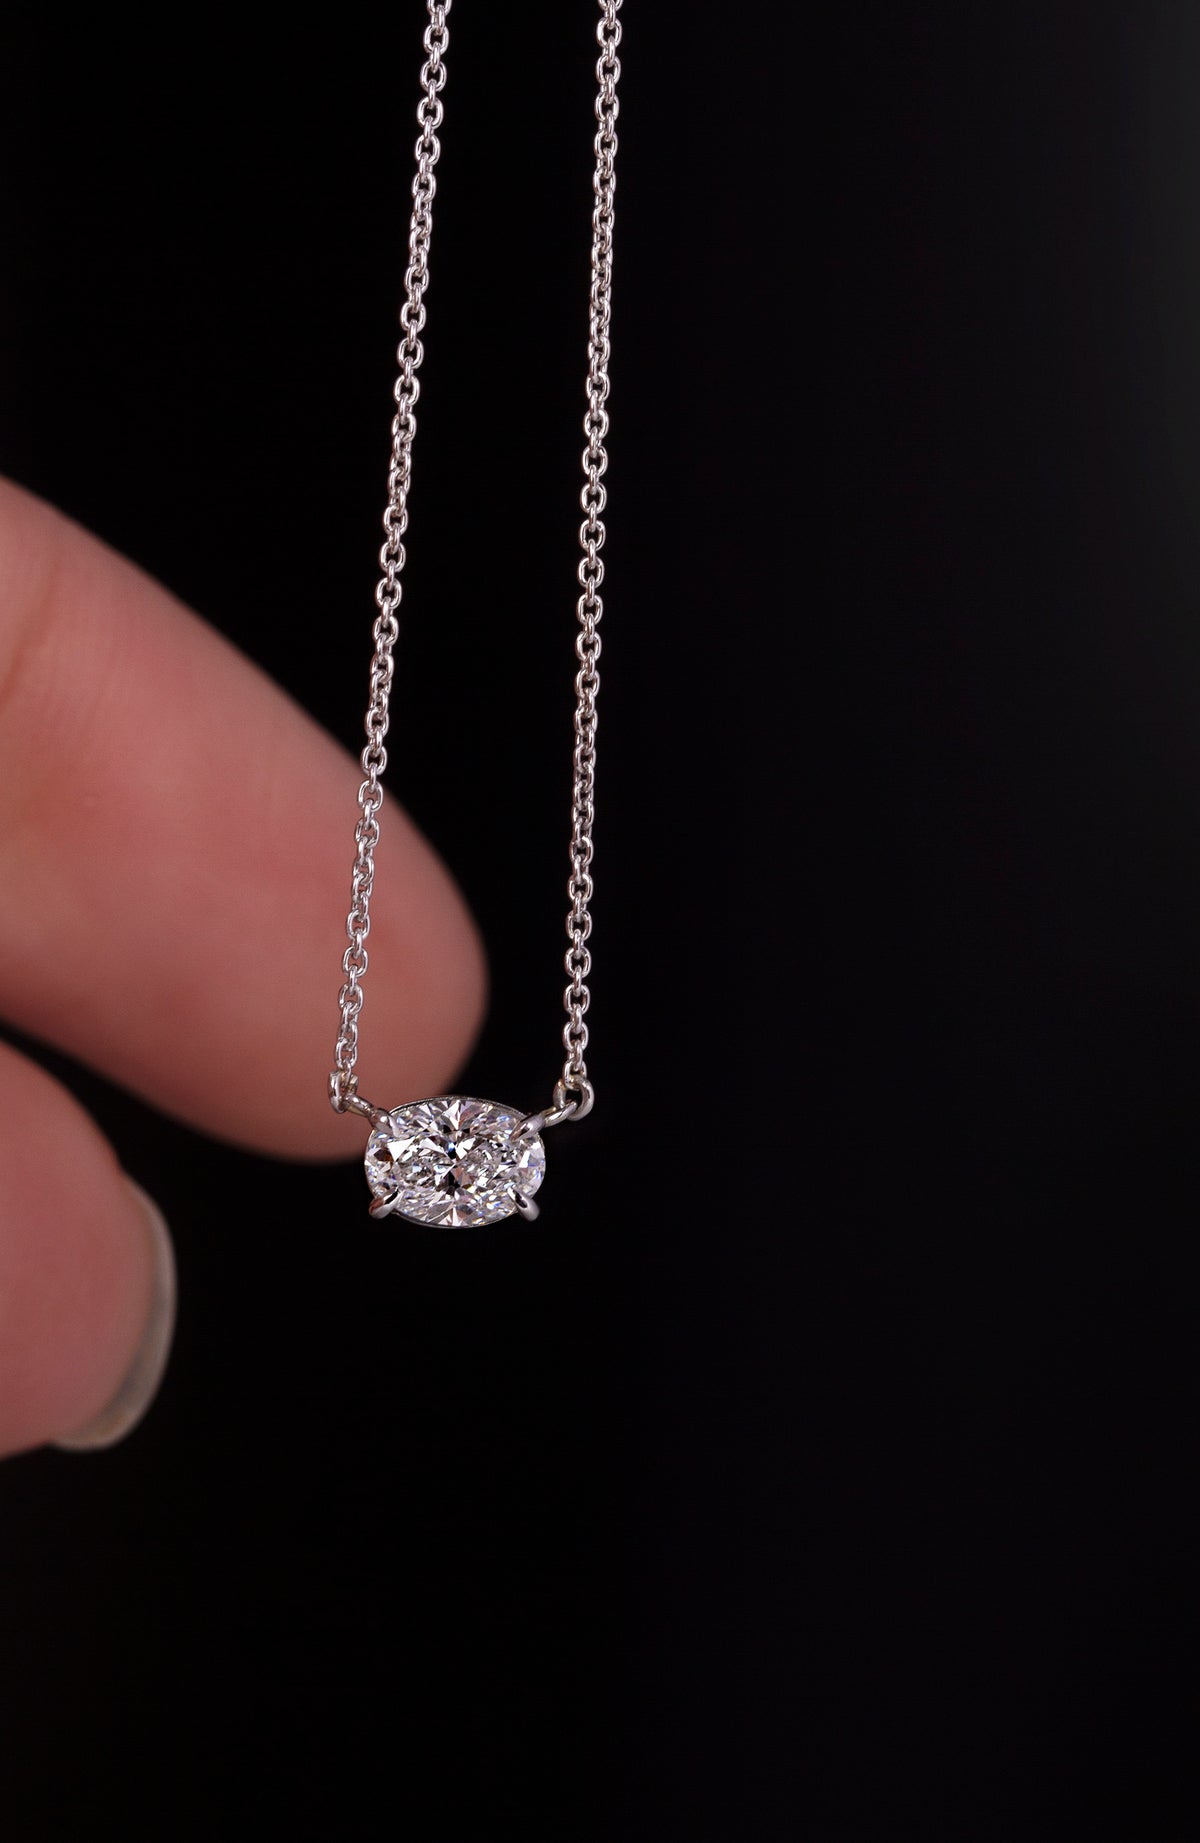 Platinum Oval Diamond pendent in an East-West setting